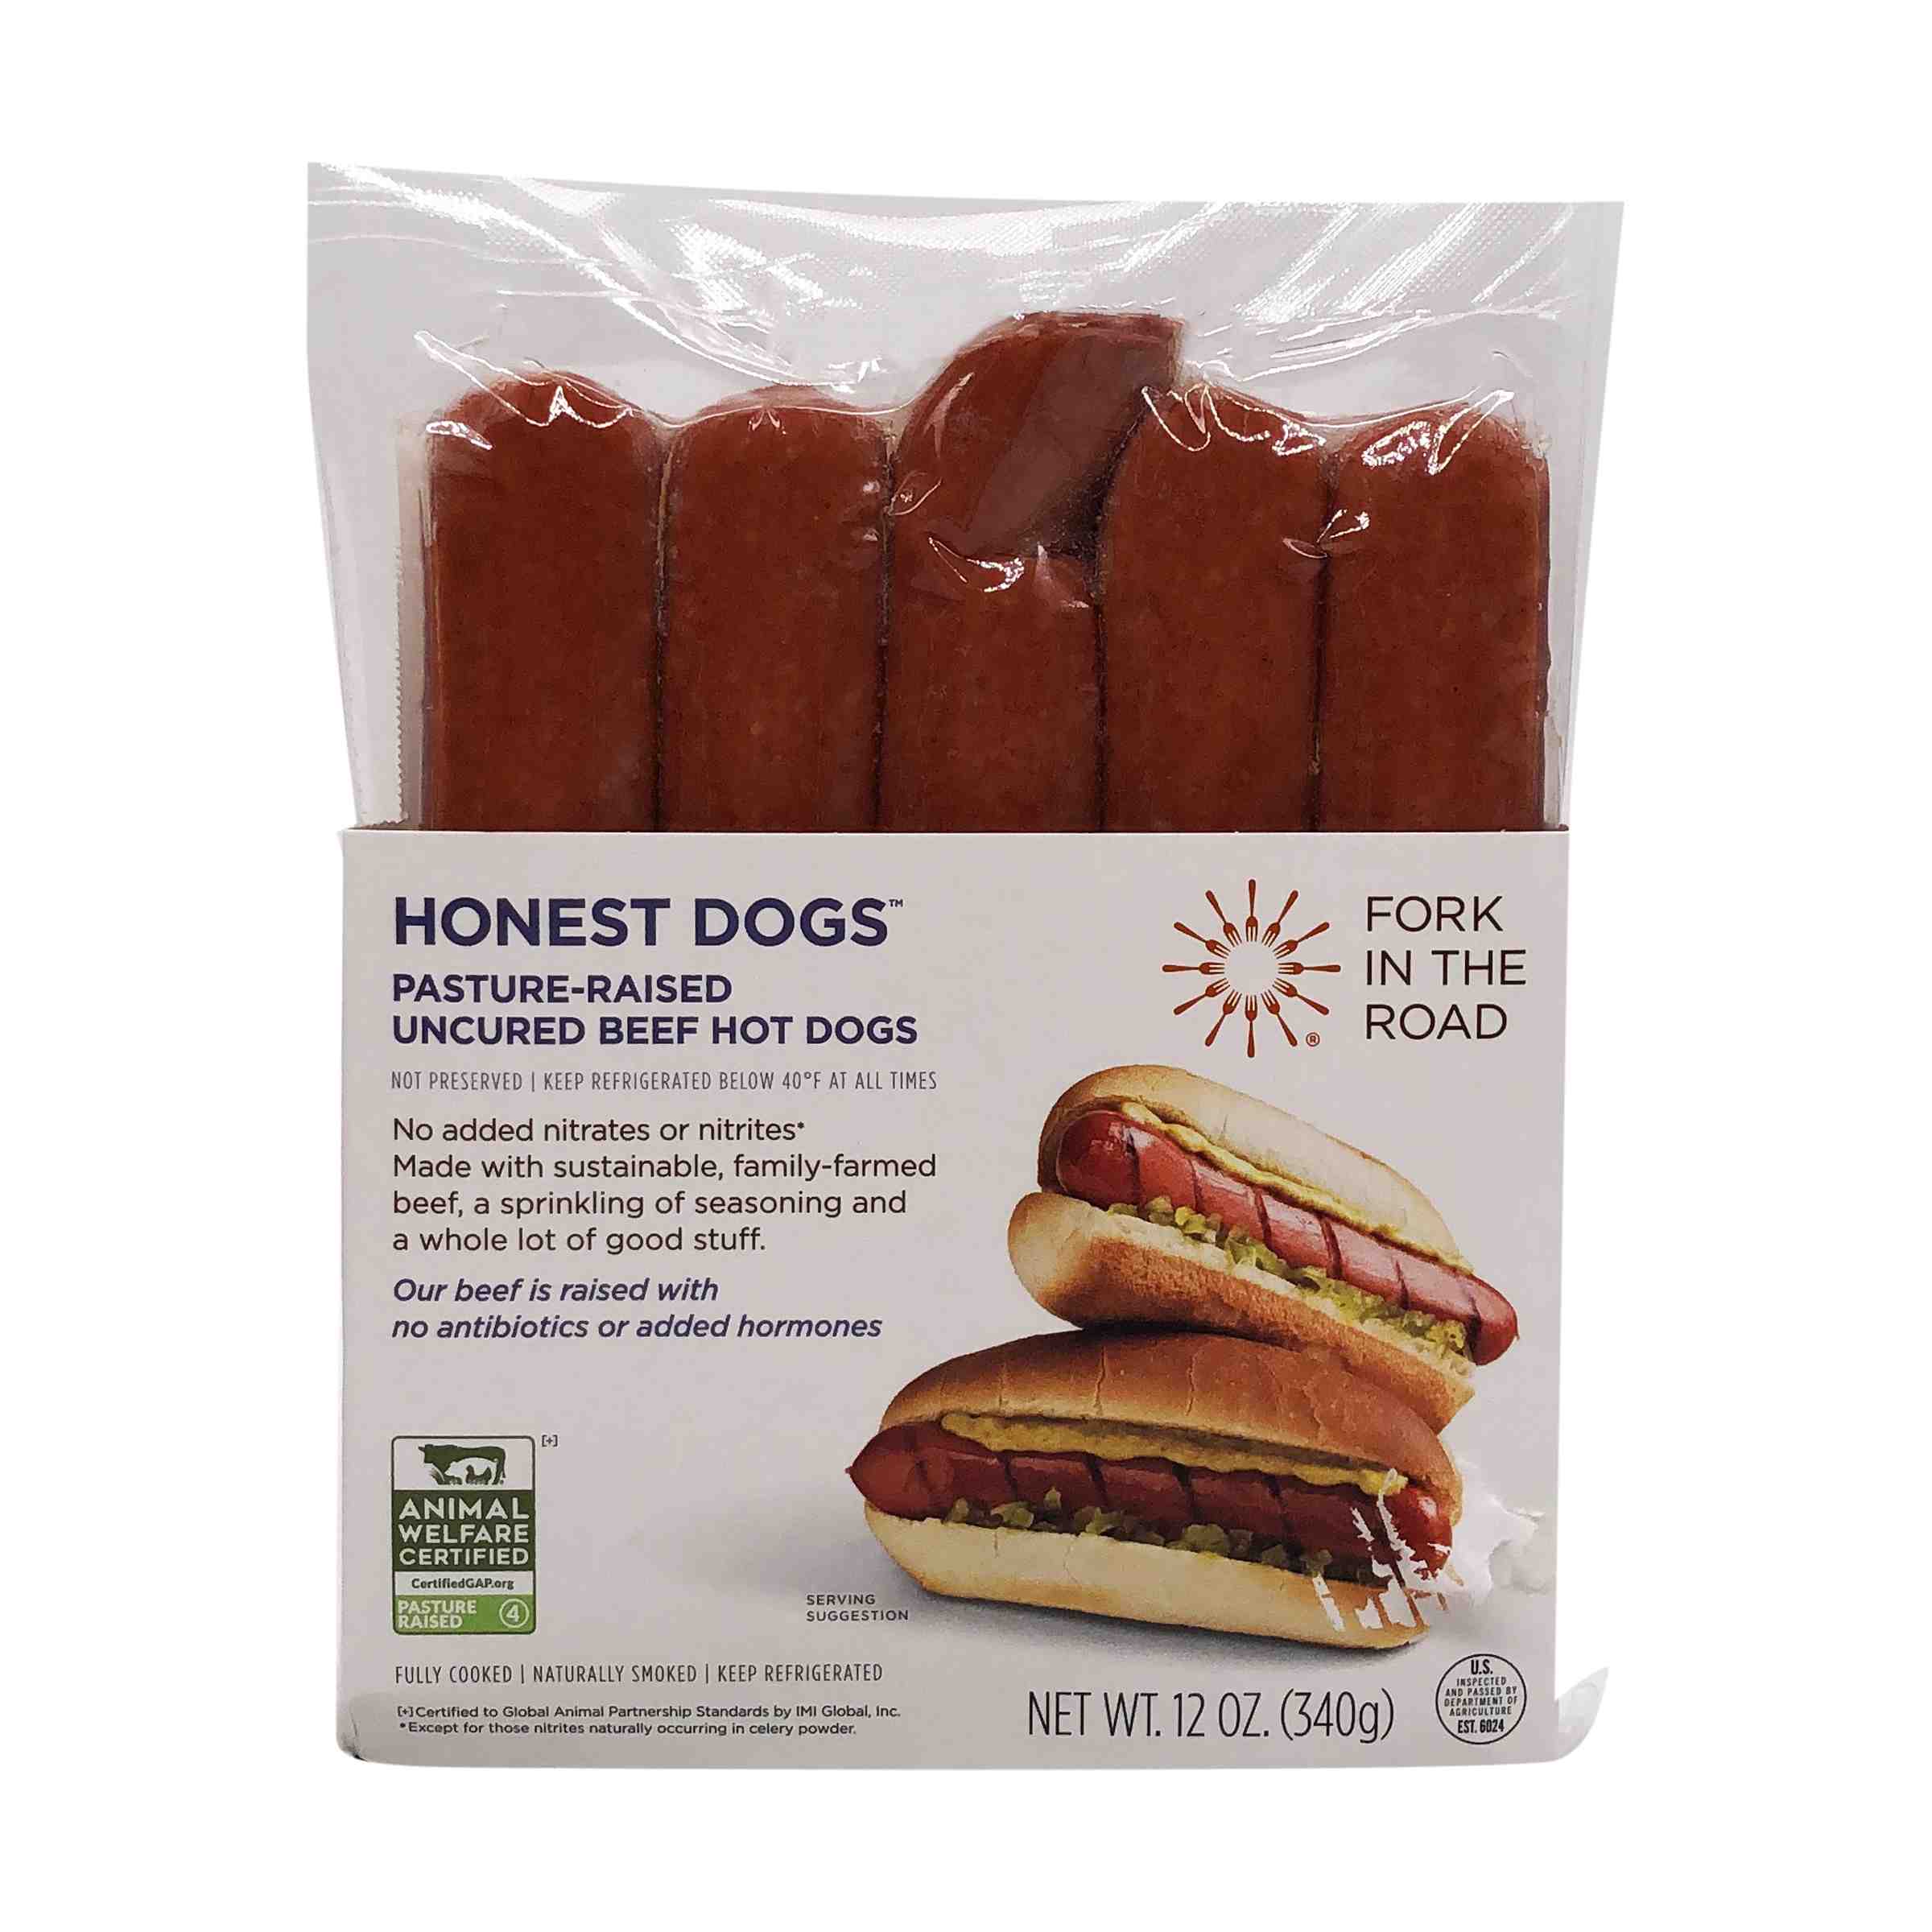 Are there bones in hot dogs?